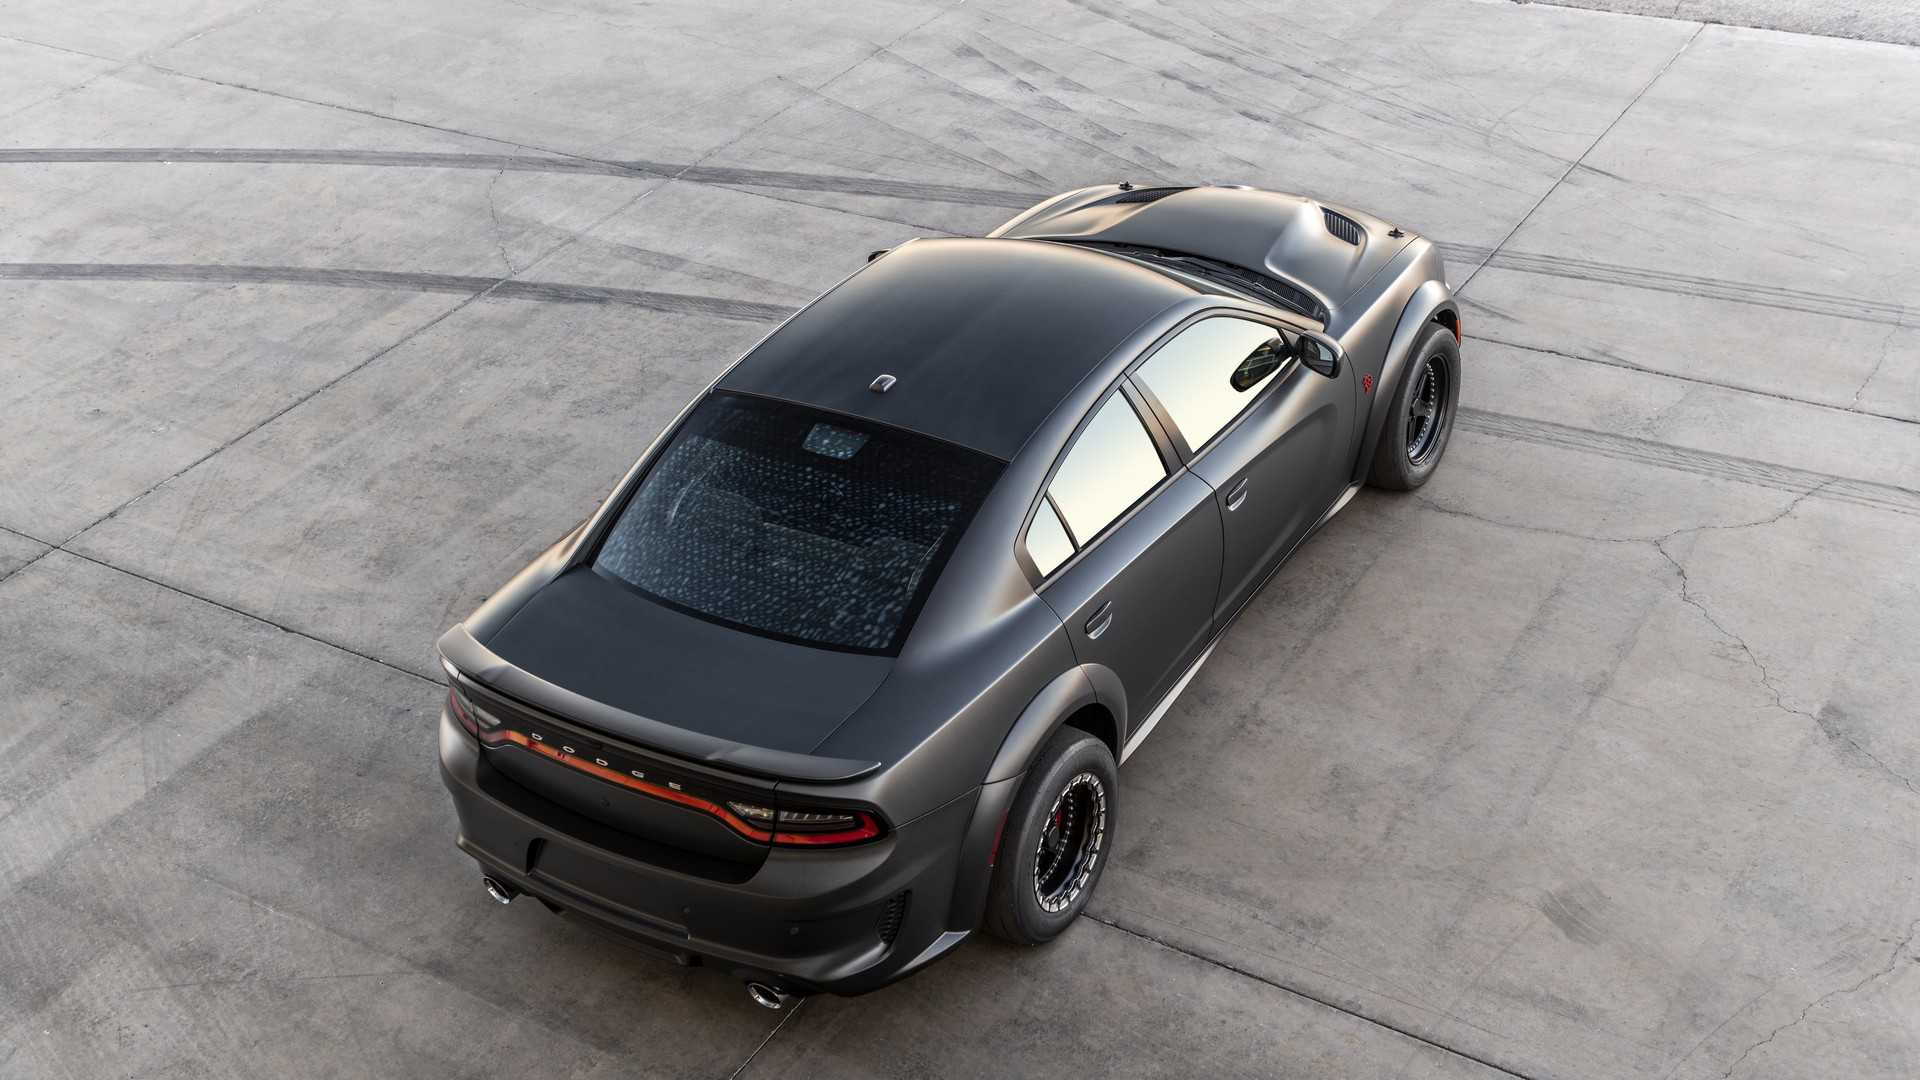 2020 Dodge Charger SRT Hellcat Widebody by SpeedKore Performance Group